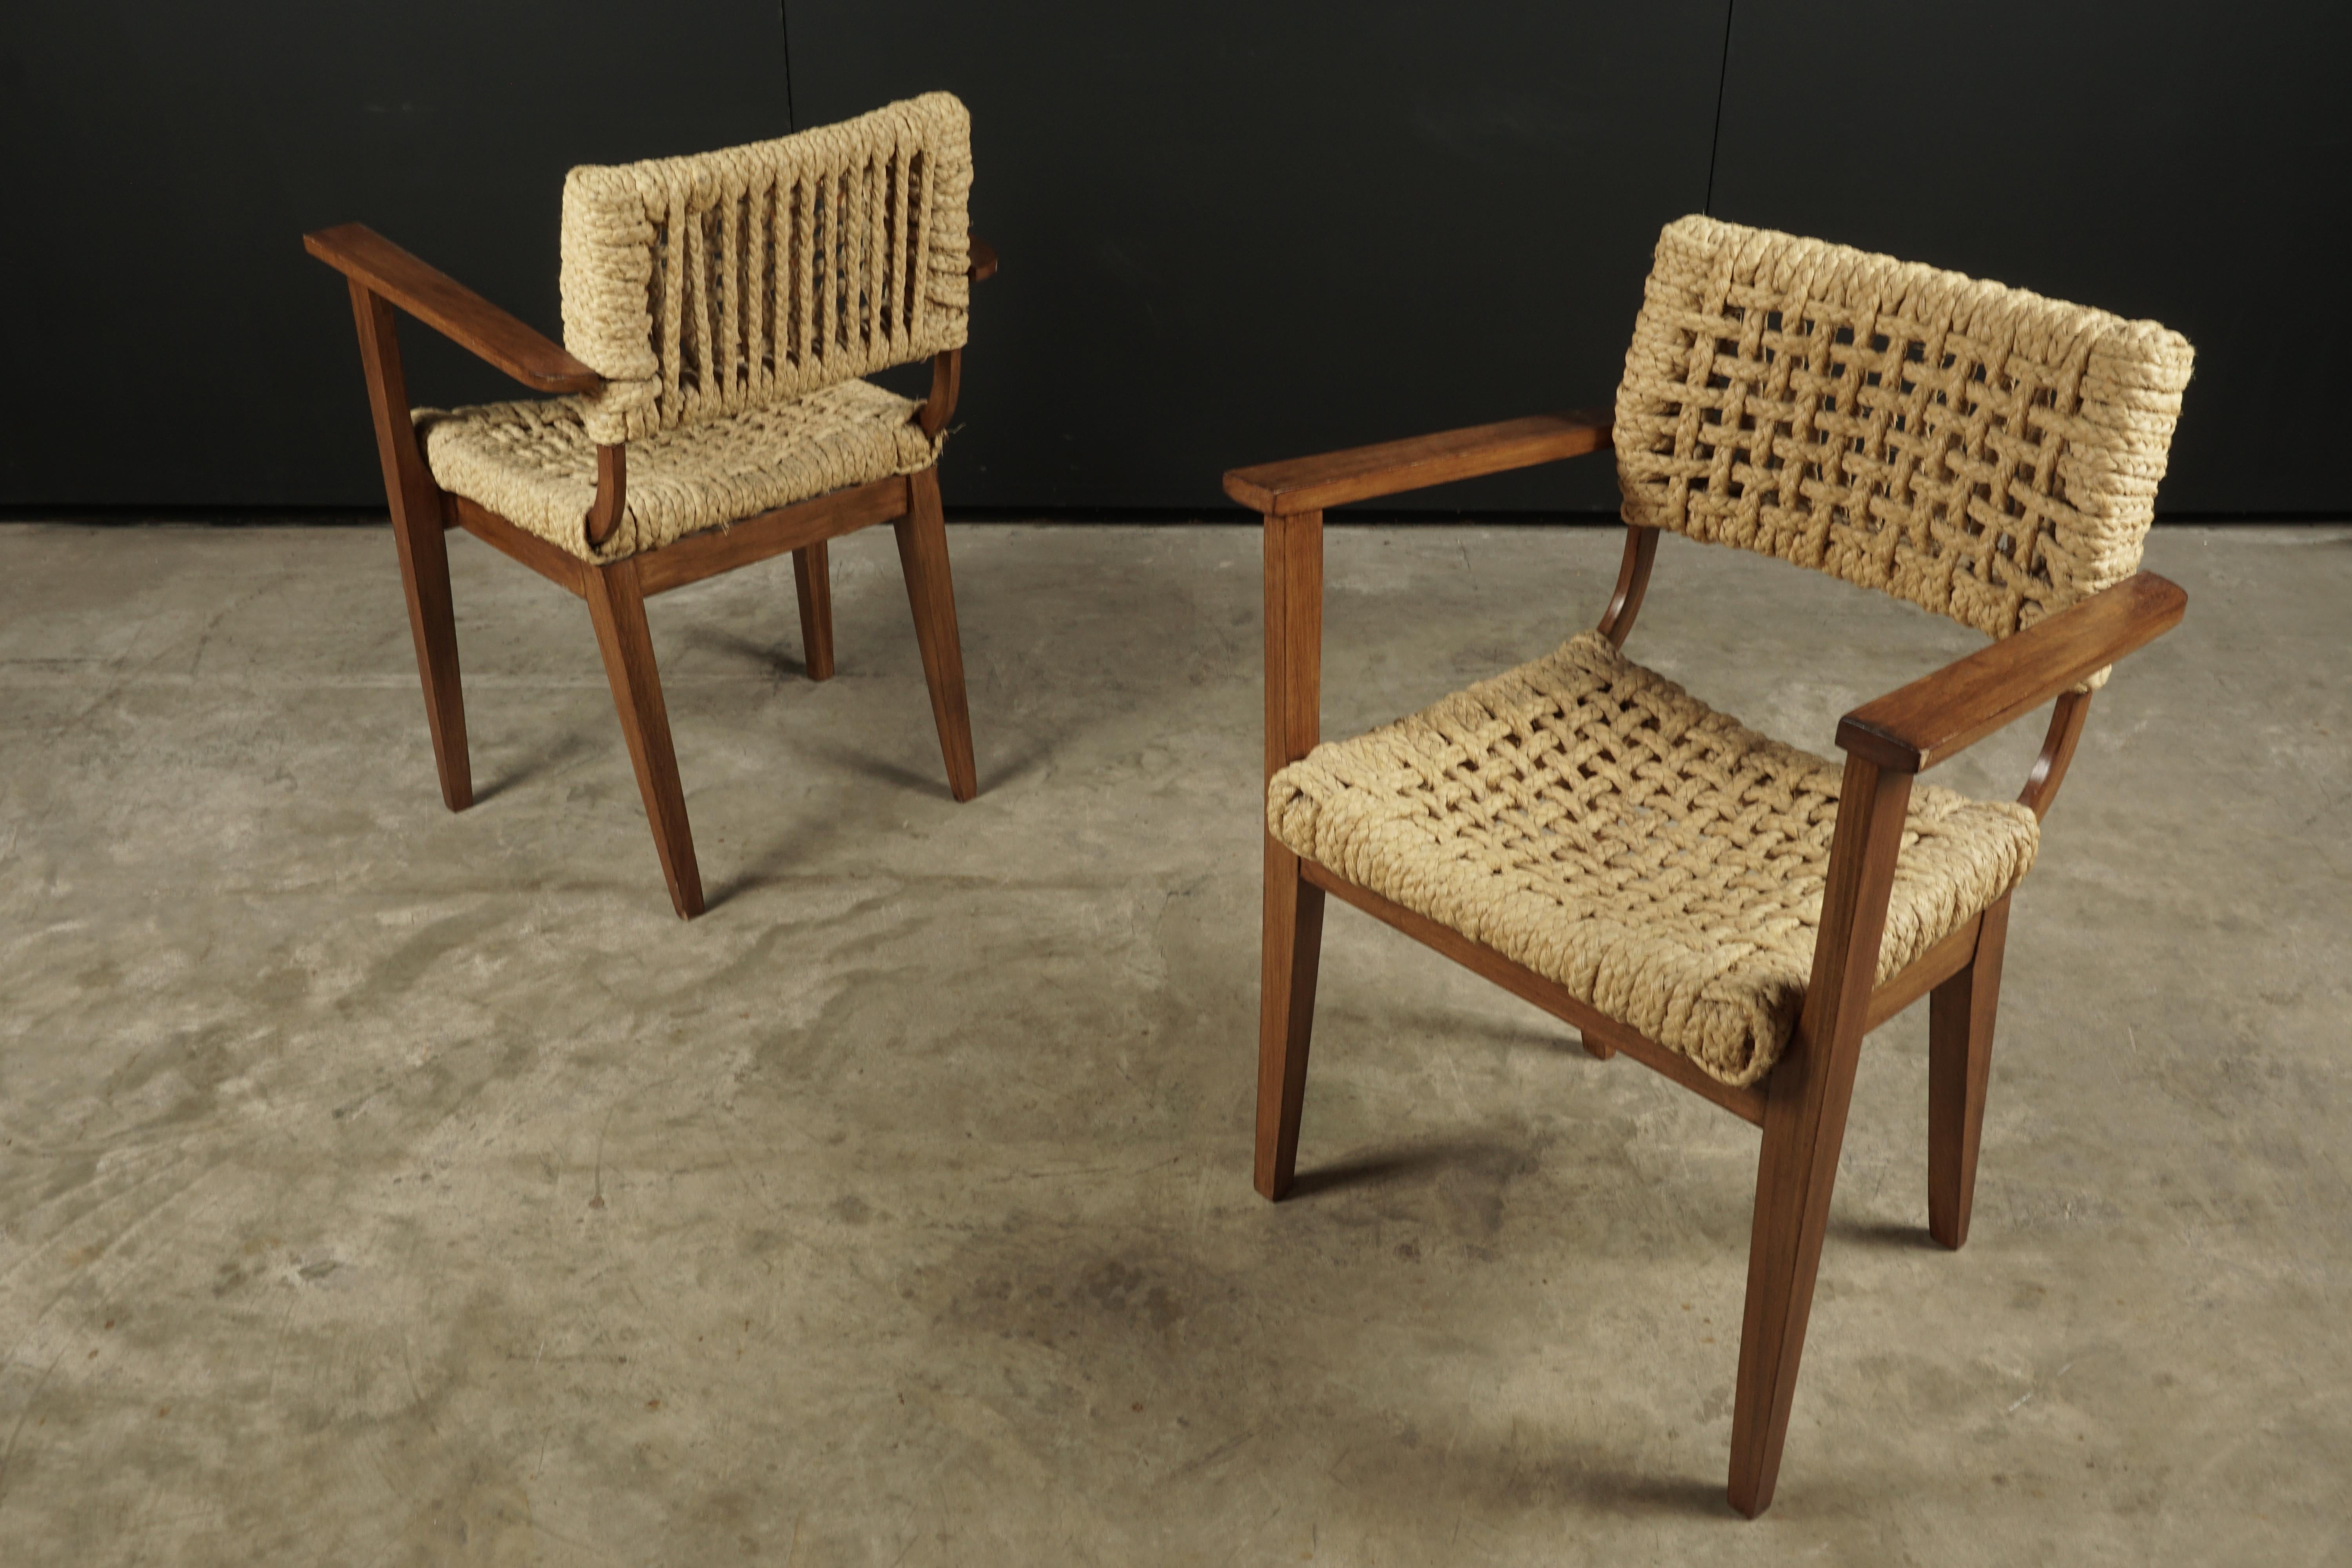 Vintage Pair of Audoux Minet armchairs from France, circa 1940. Oak frames with rope seats and backs.